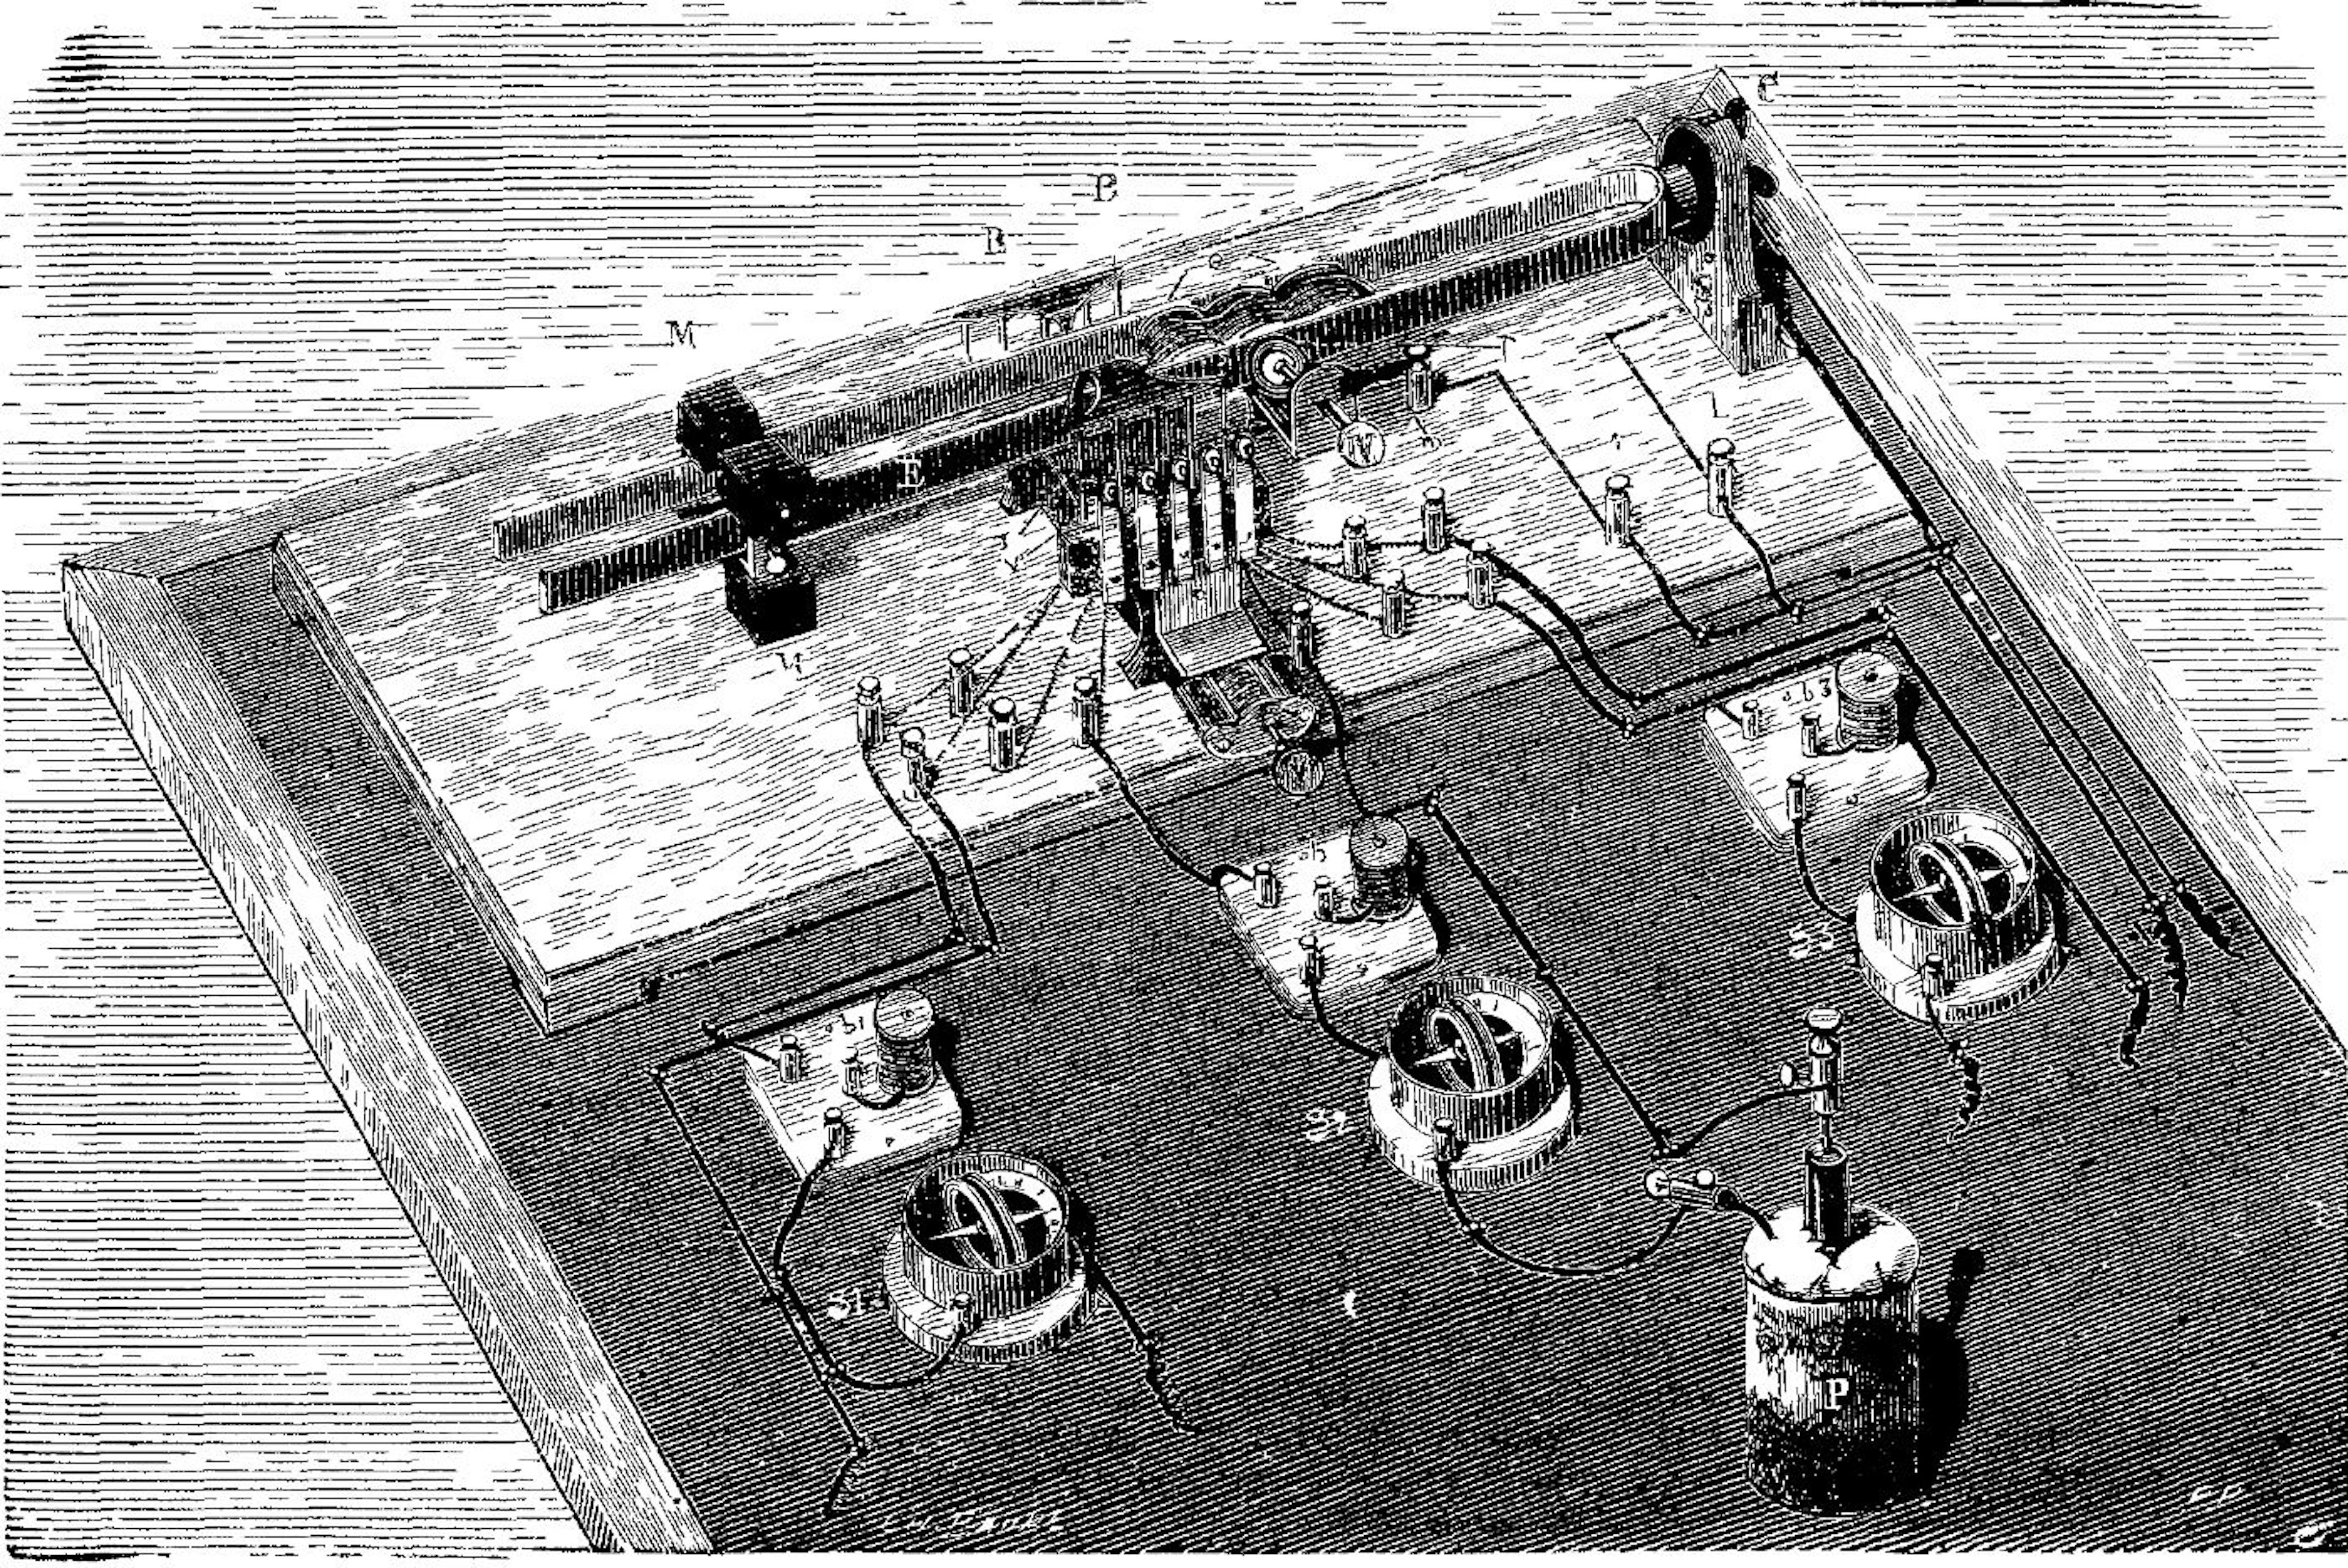 FIG. 3.—ARRANGEMENT FOR TESTING ELECTRIC PILES.